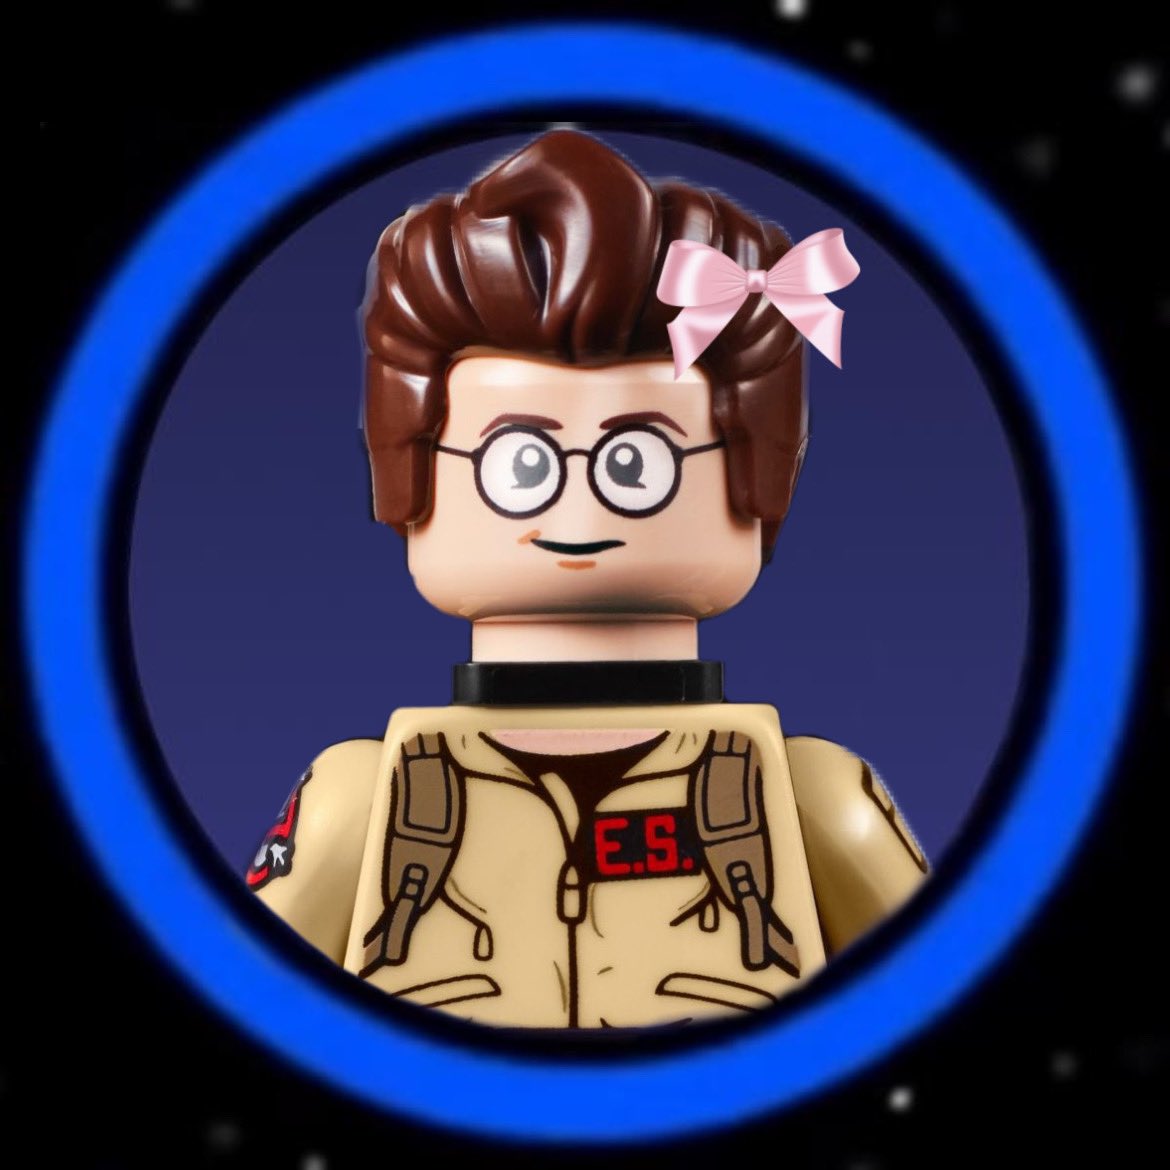 Free Ghostbusters Lego profile pictures made by me!